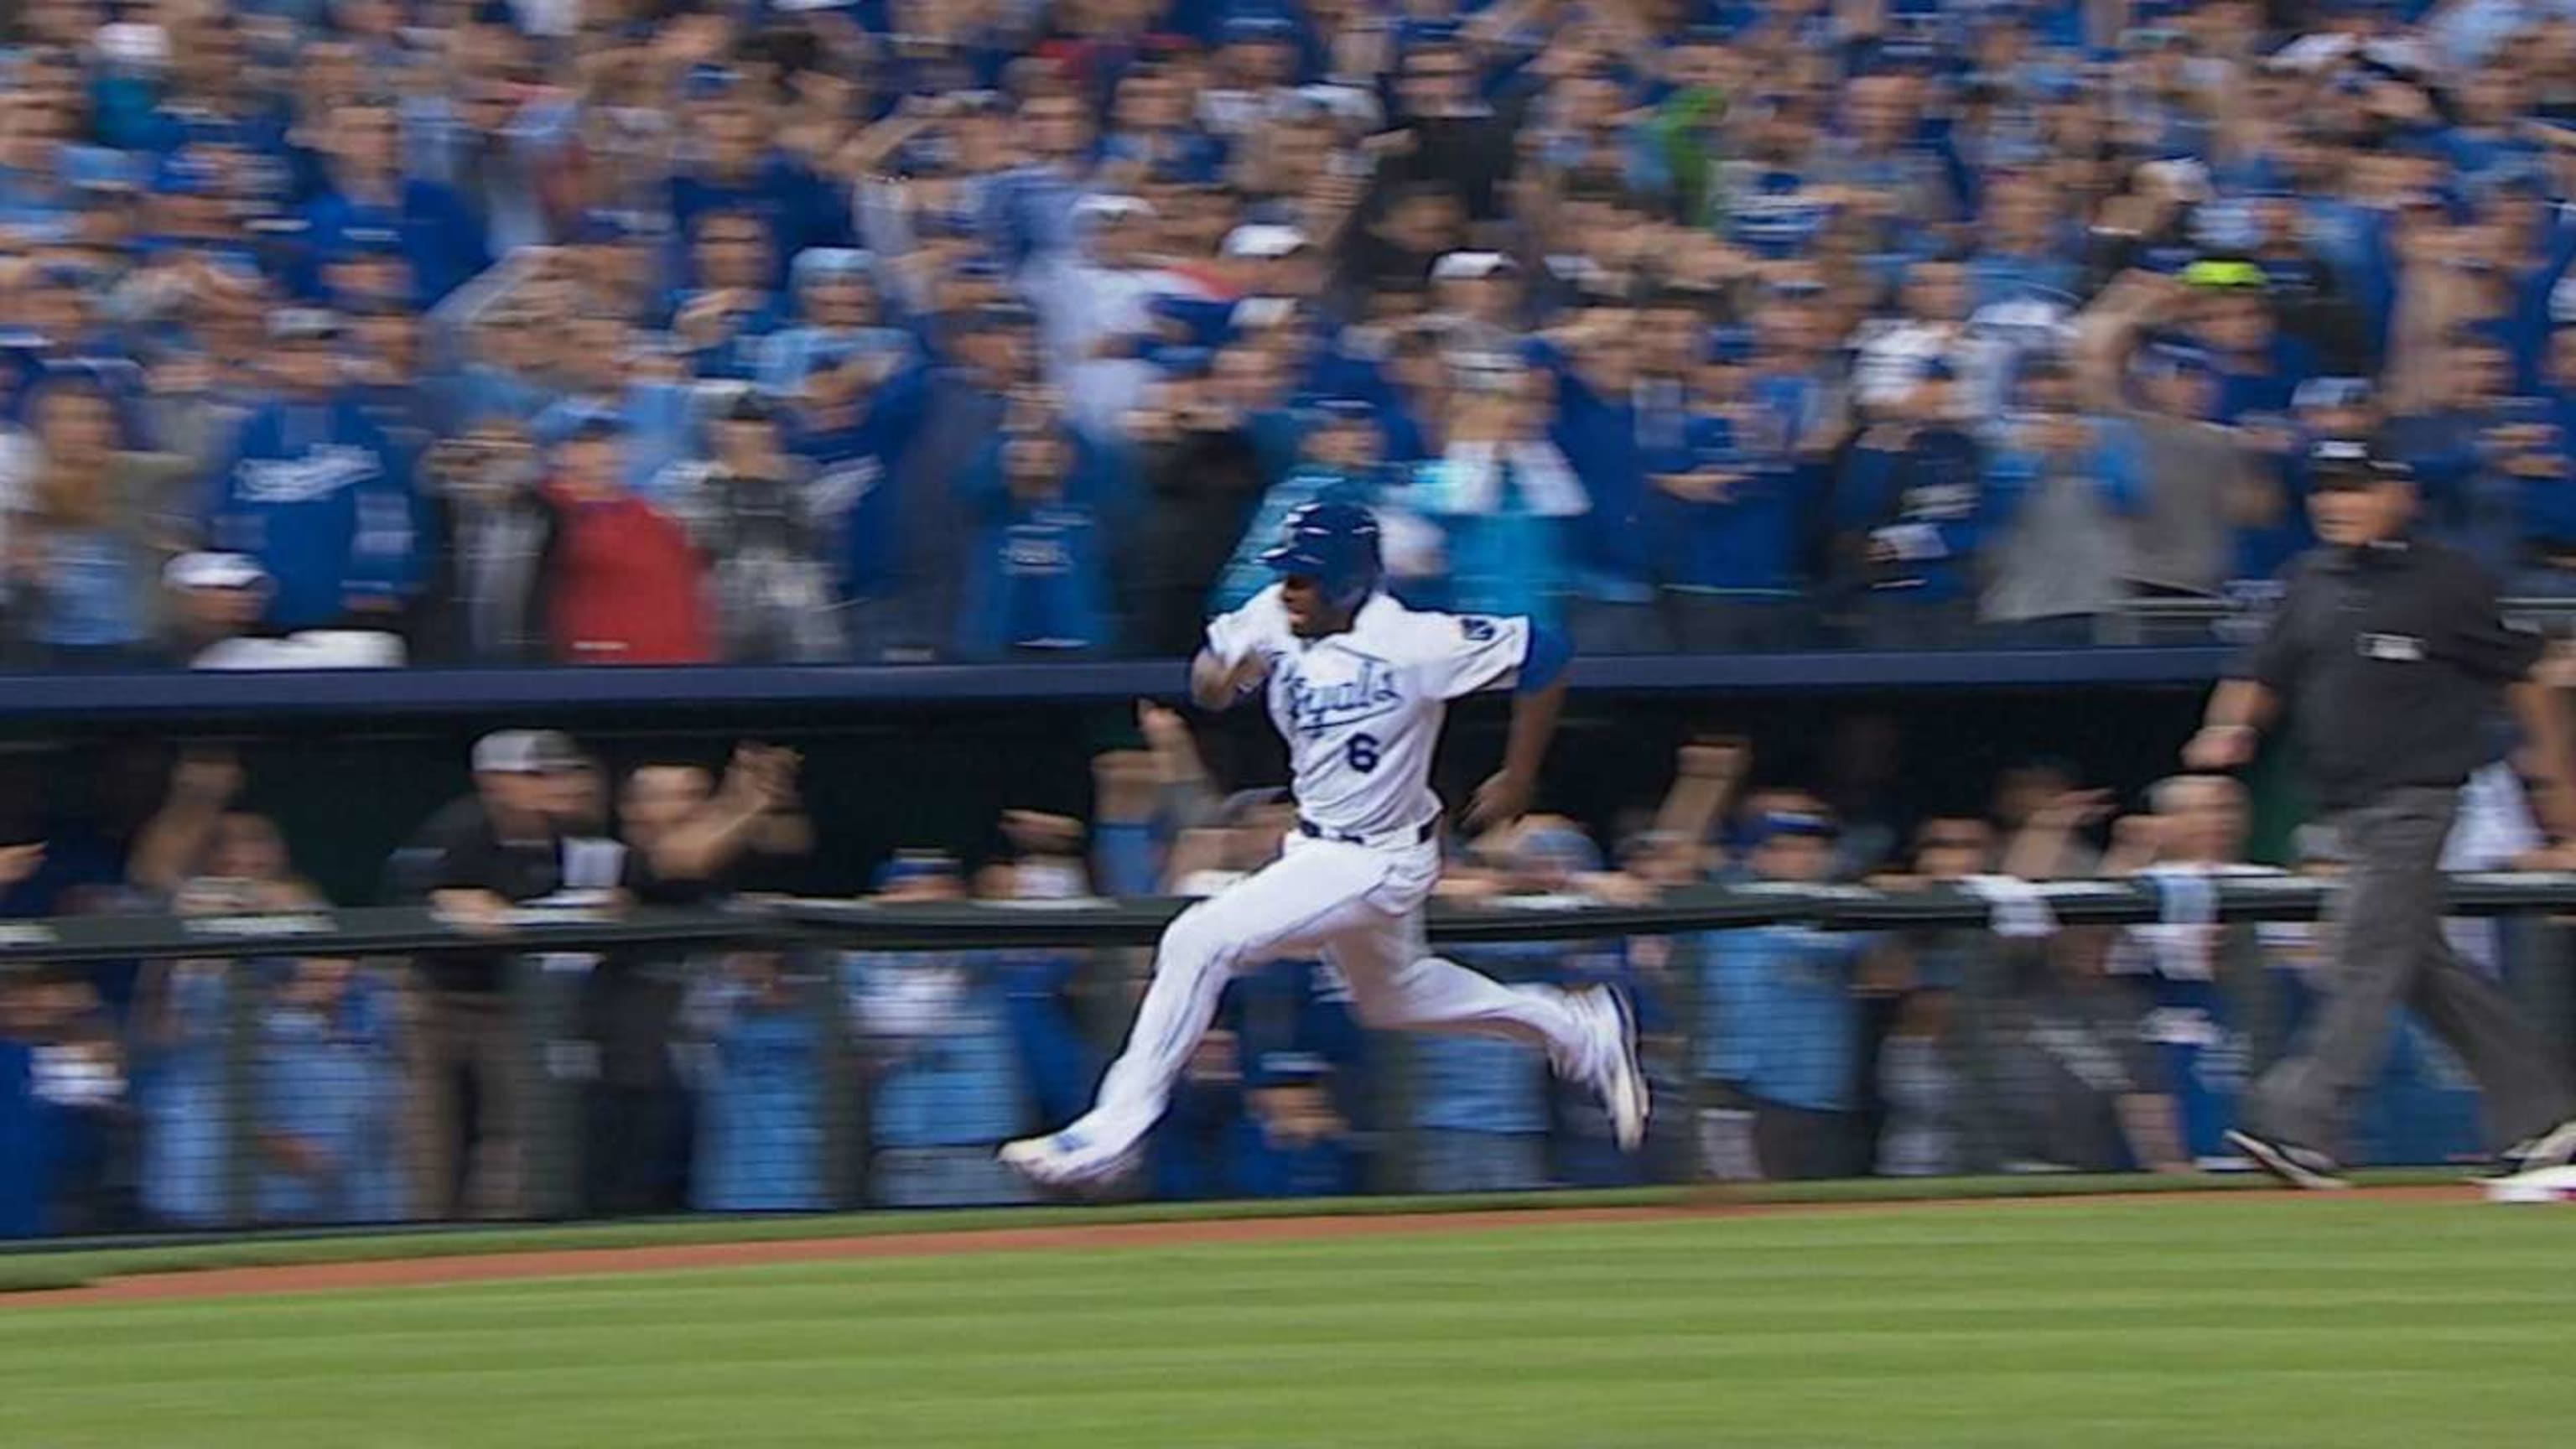 Lorenzo Cain leaves lasting legacy with Royals